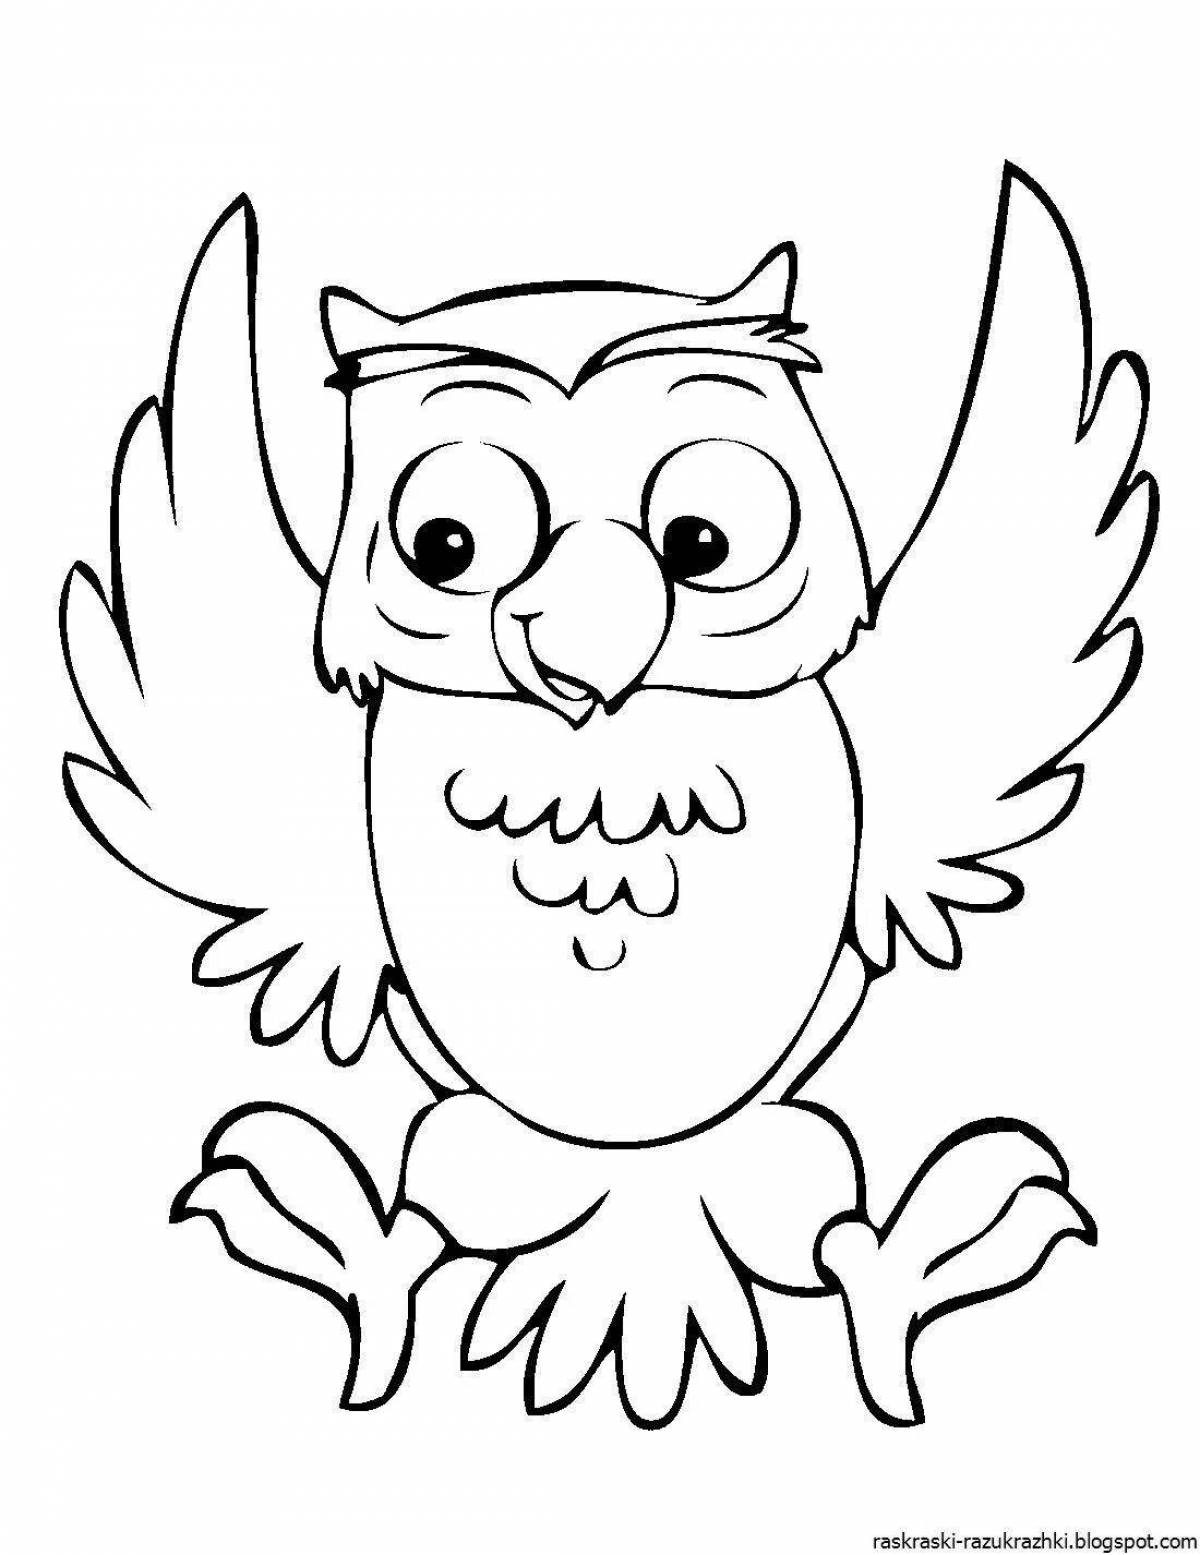 Exquisite owl coloring page for kids